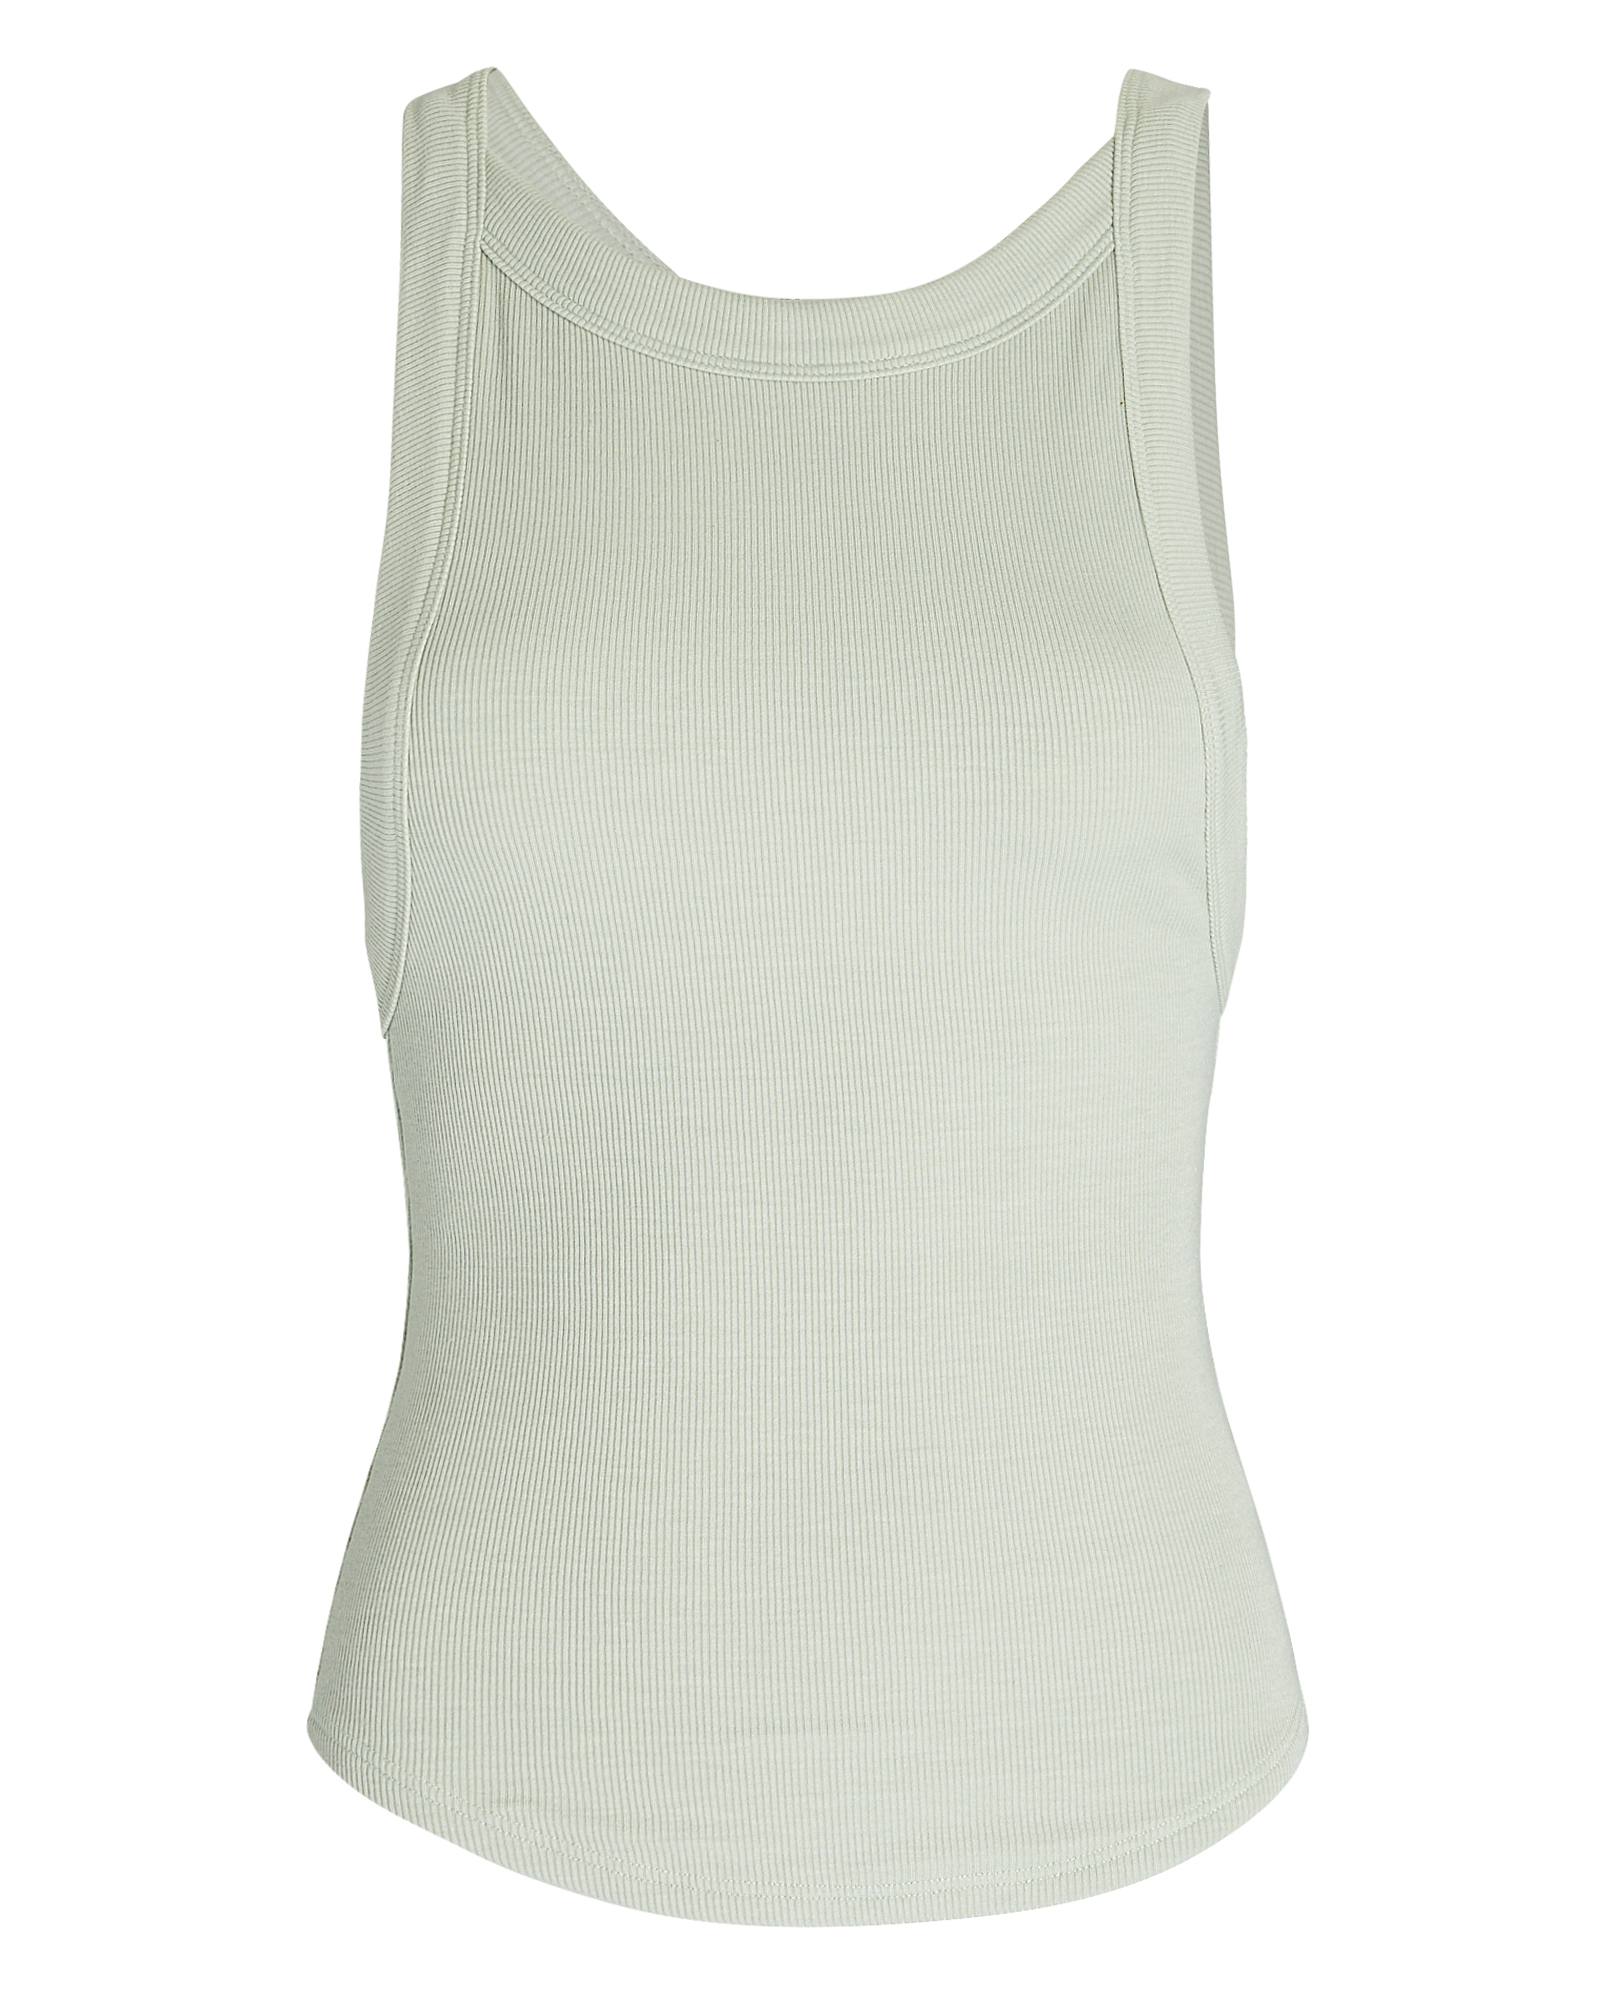 The Line by K Ximeno High Neck Tank In Green | INTERMIX®